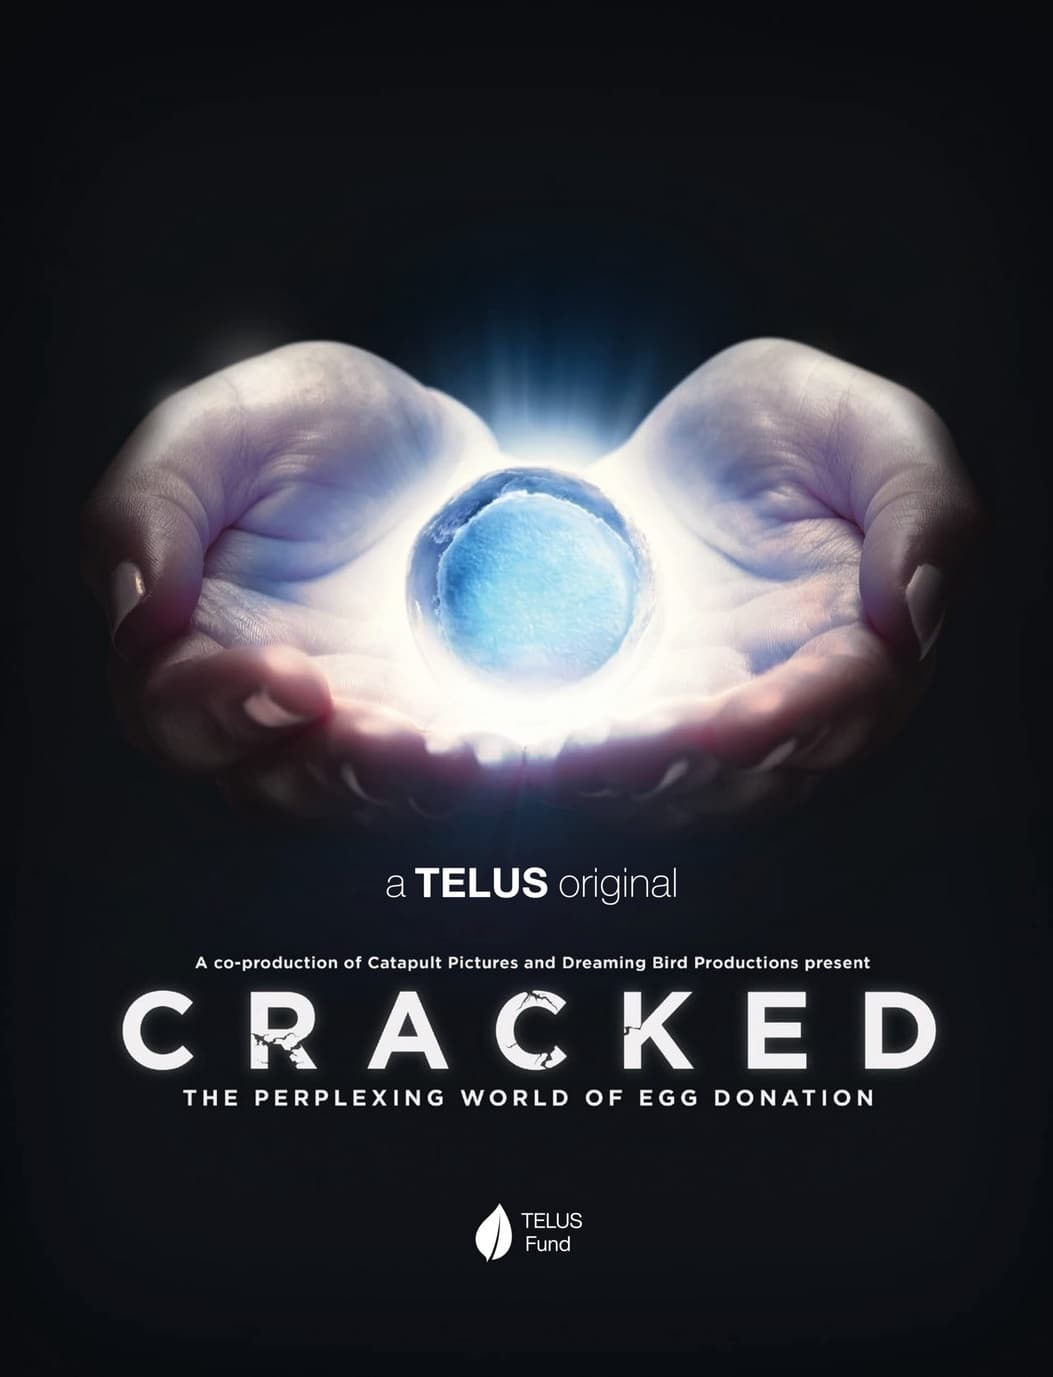 Cracked: The Perplexing World of Egg Donation